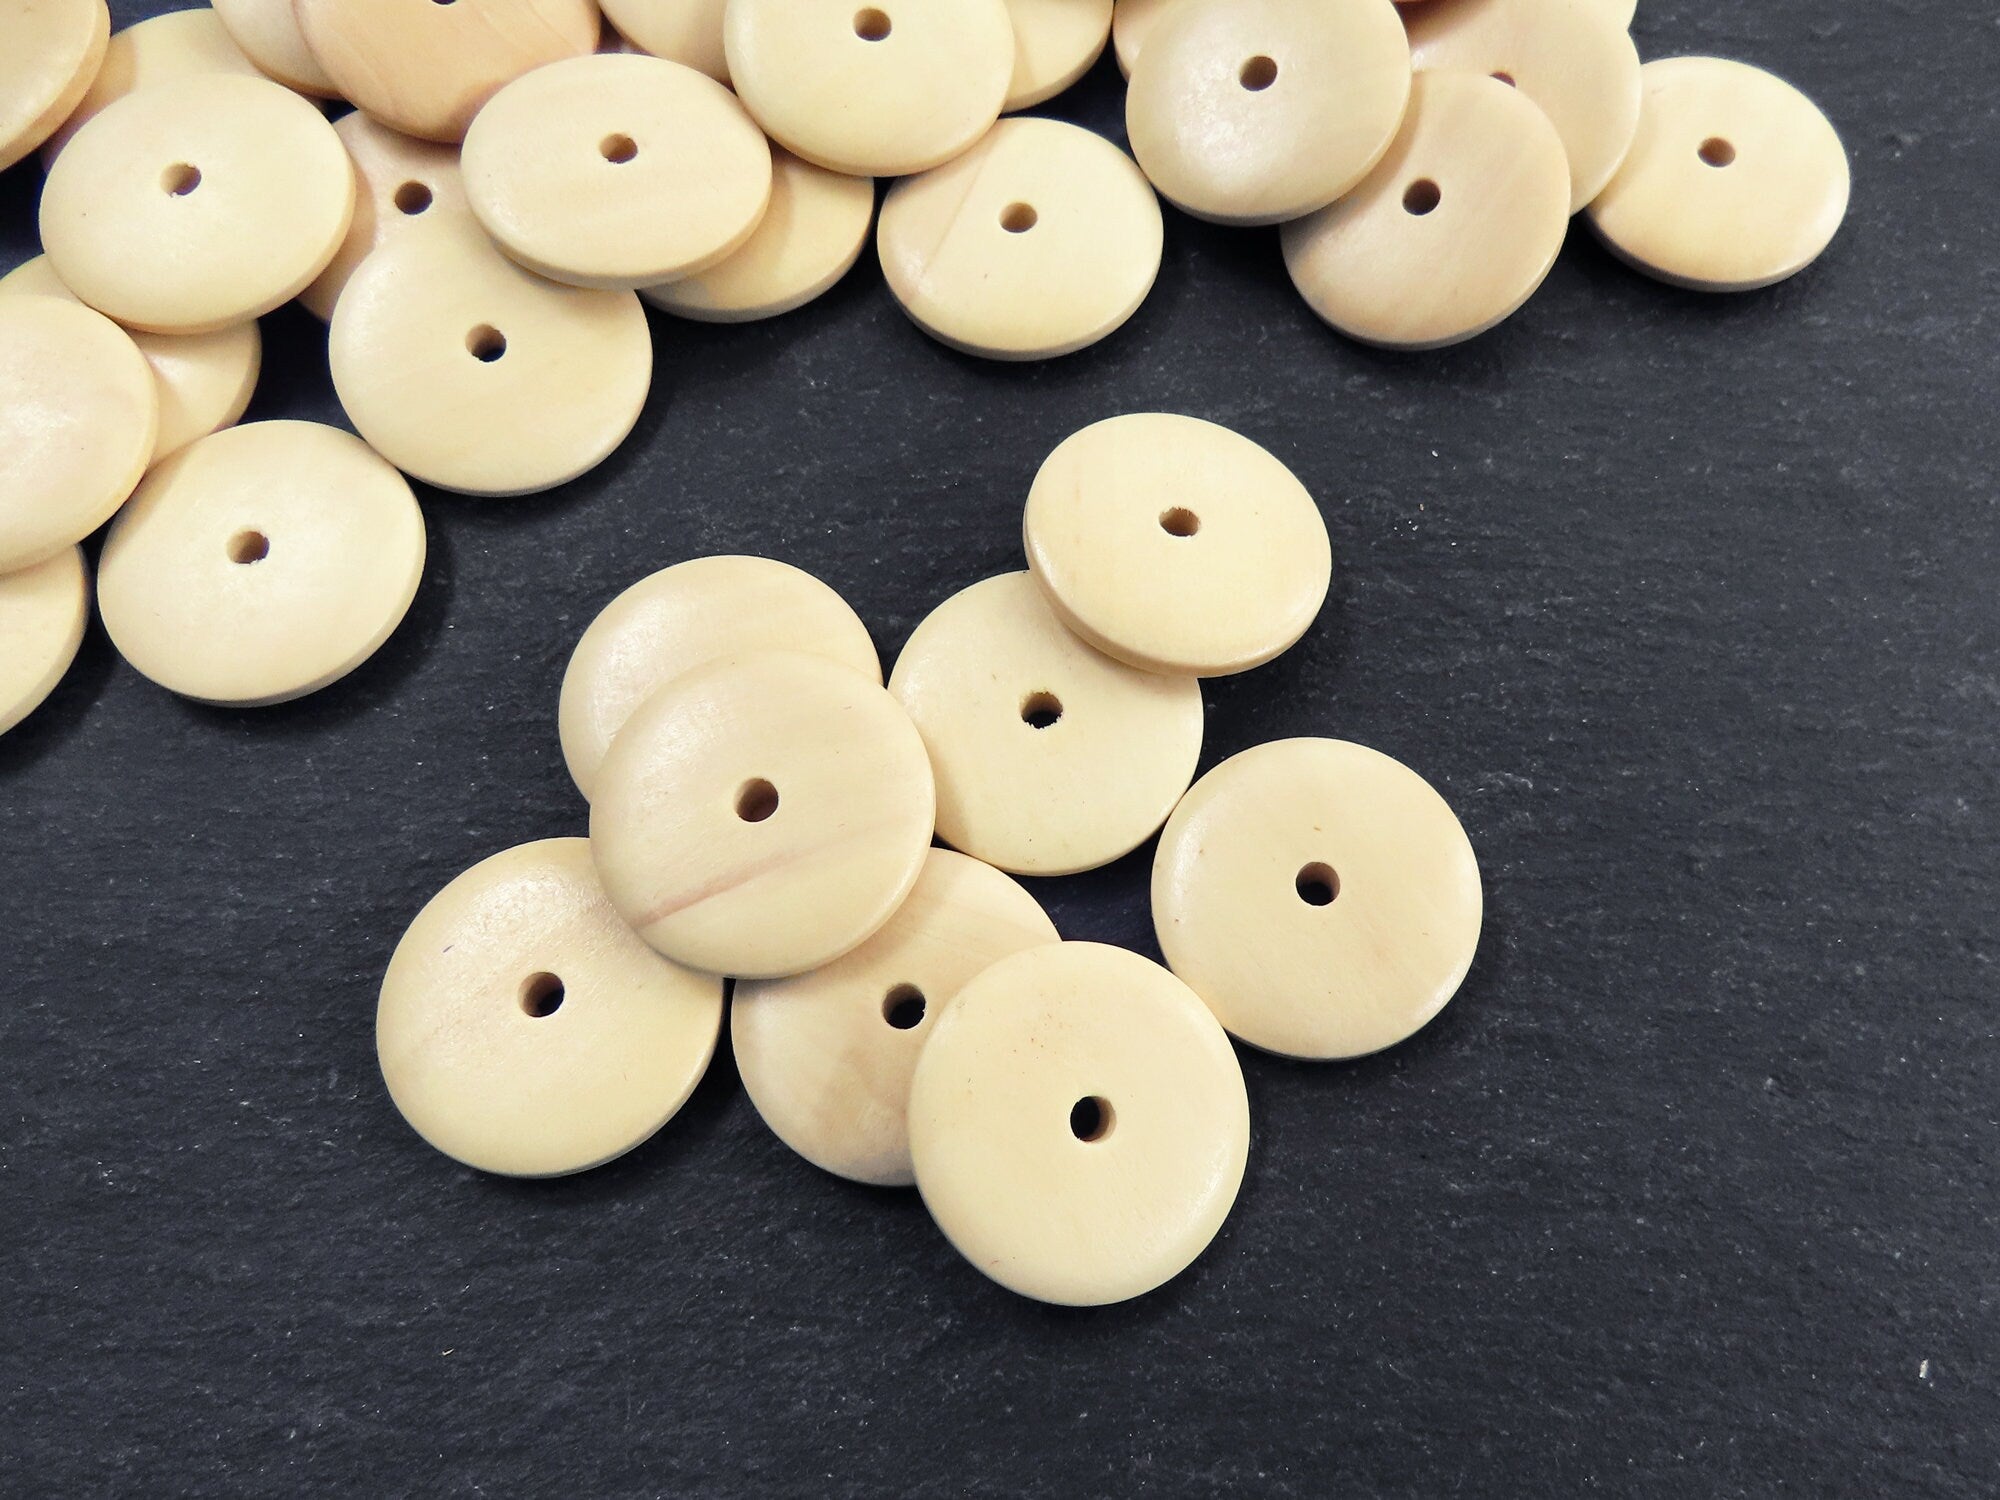 BigOtters Wood Beads 25mm 1Inch Natural Round Wooden Beads